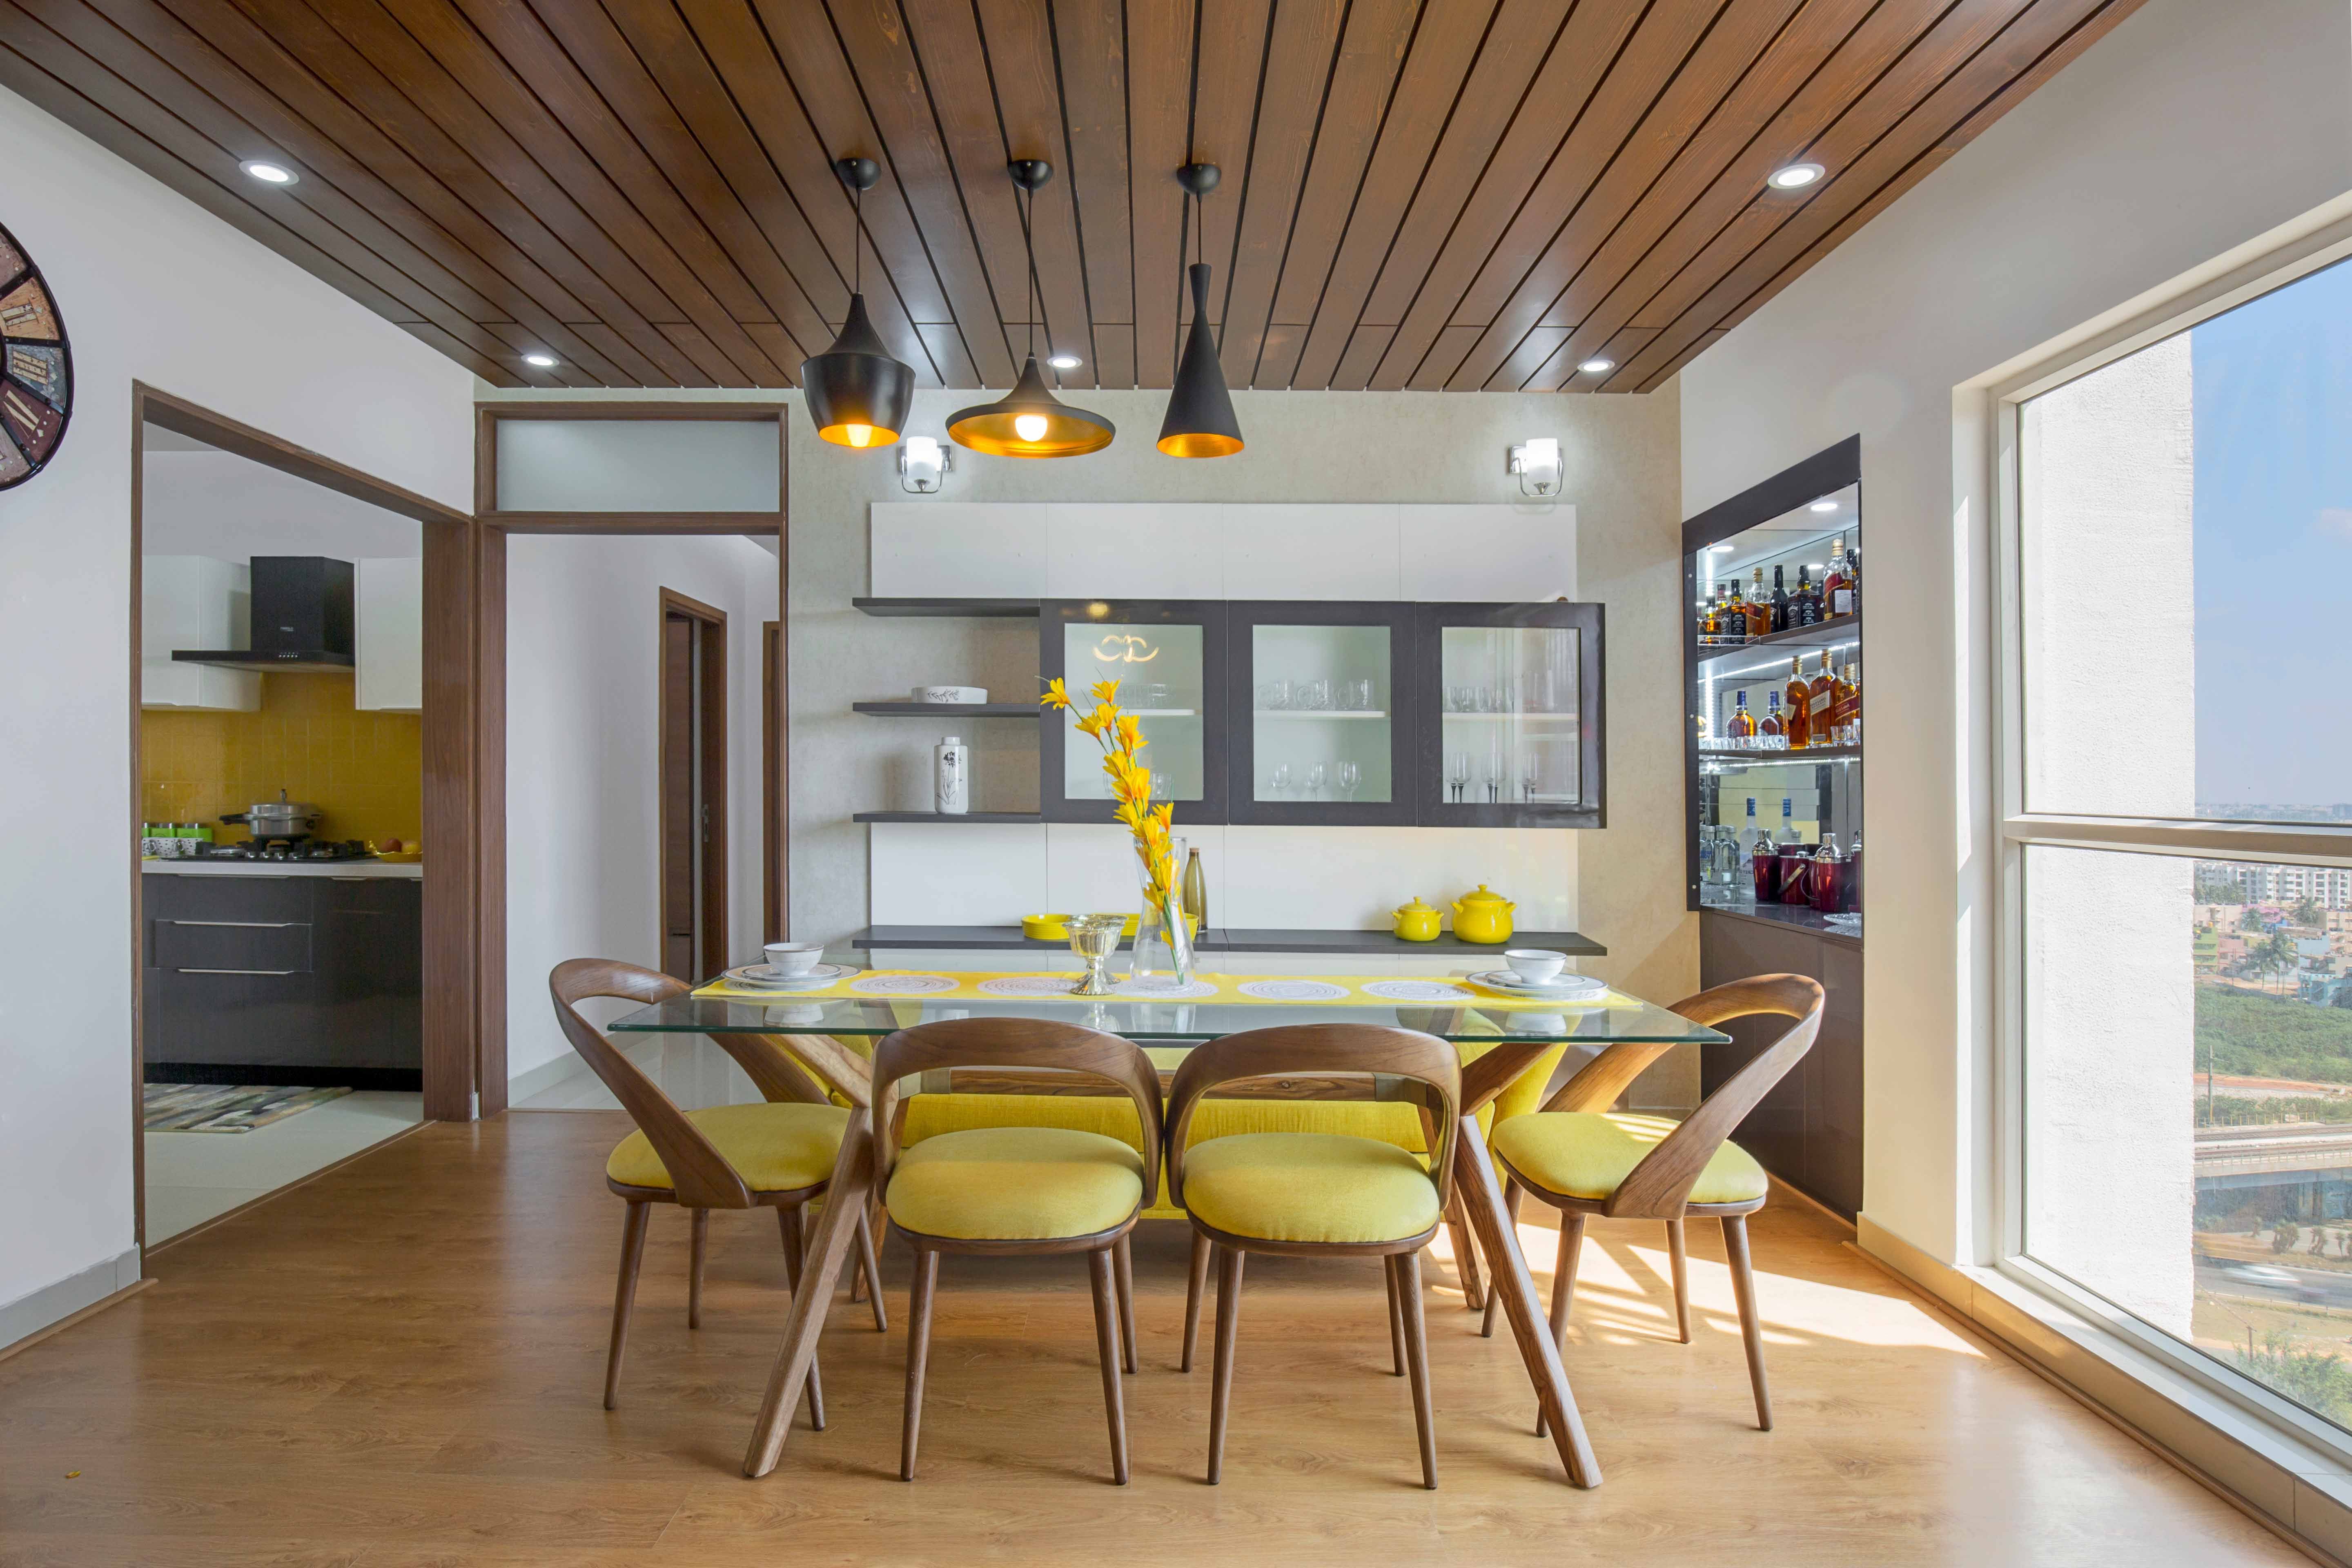 Contemporary 3-BHK Flat In Bangalore With Spacious Grey And Yellow Living Room Design